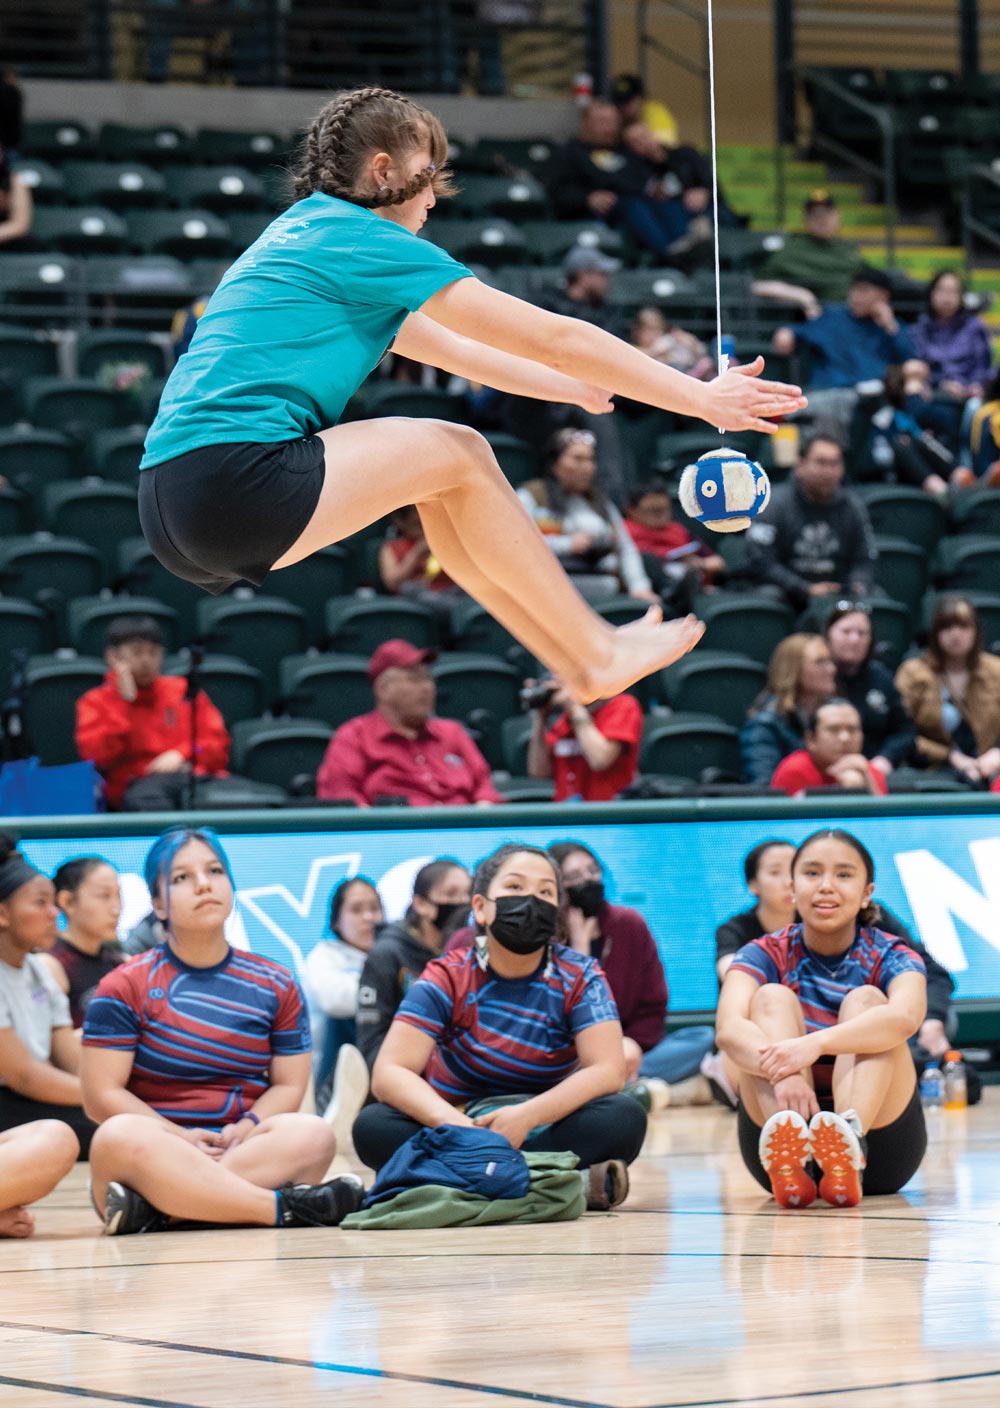 a girl pictured in mid-air during a play at the Native Youth Olympics